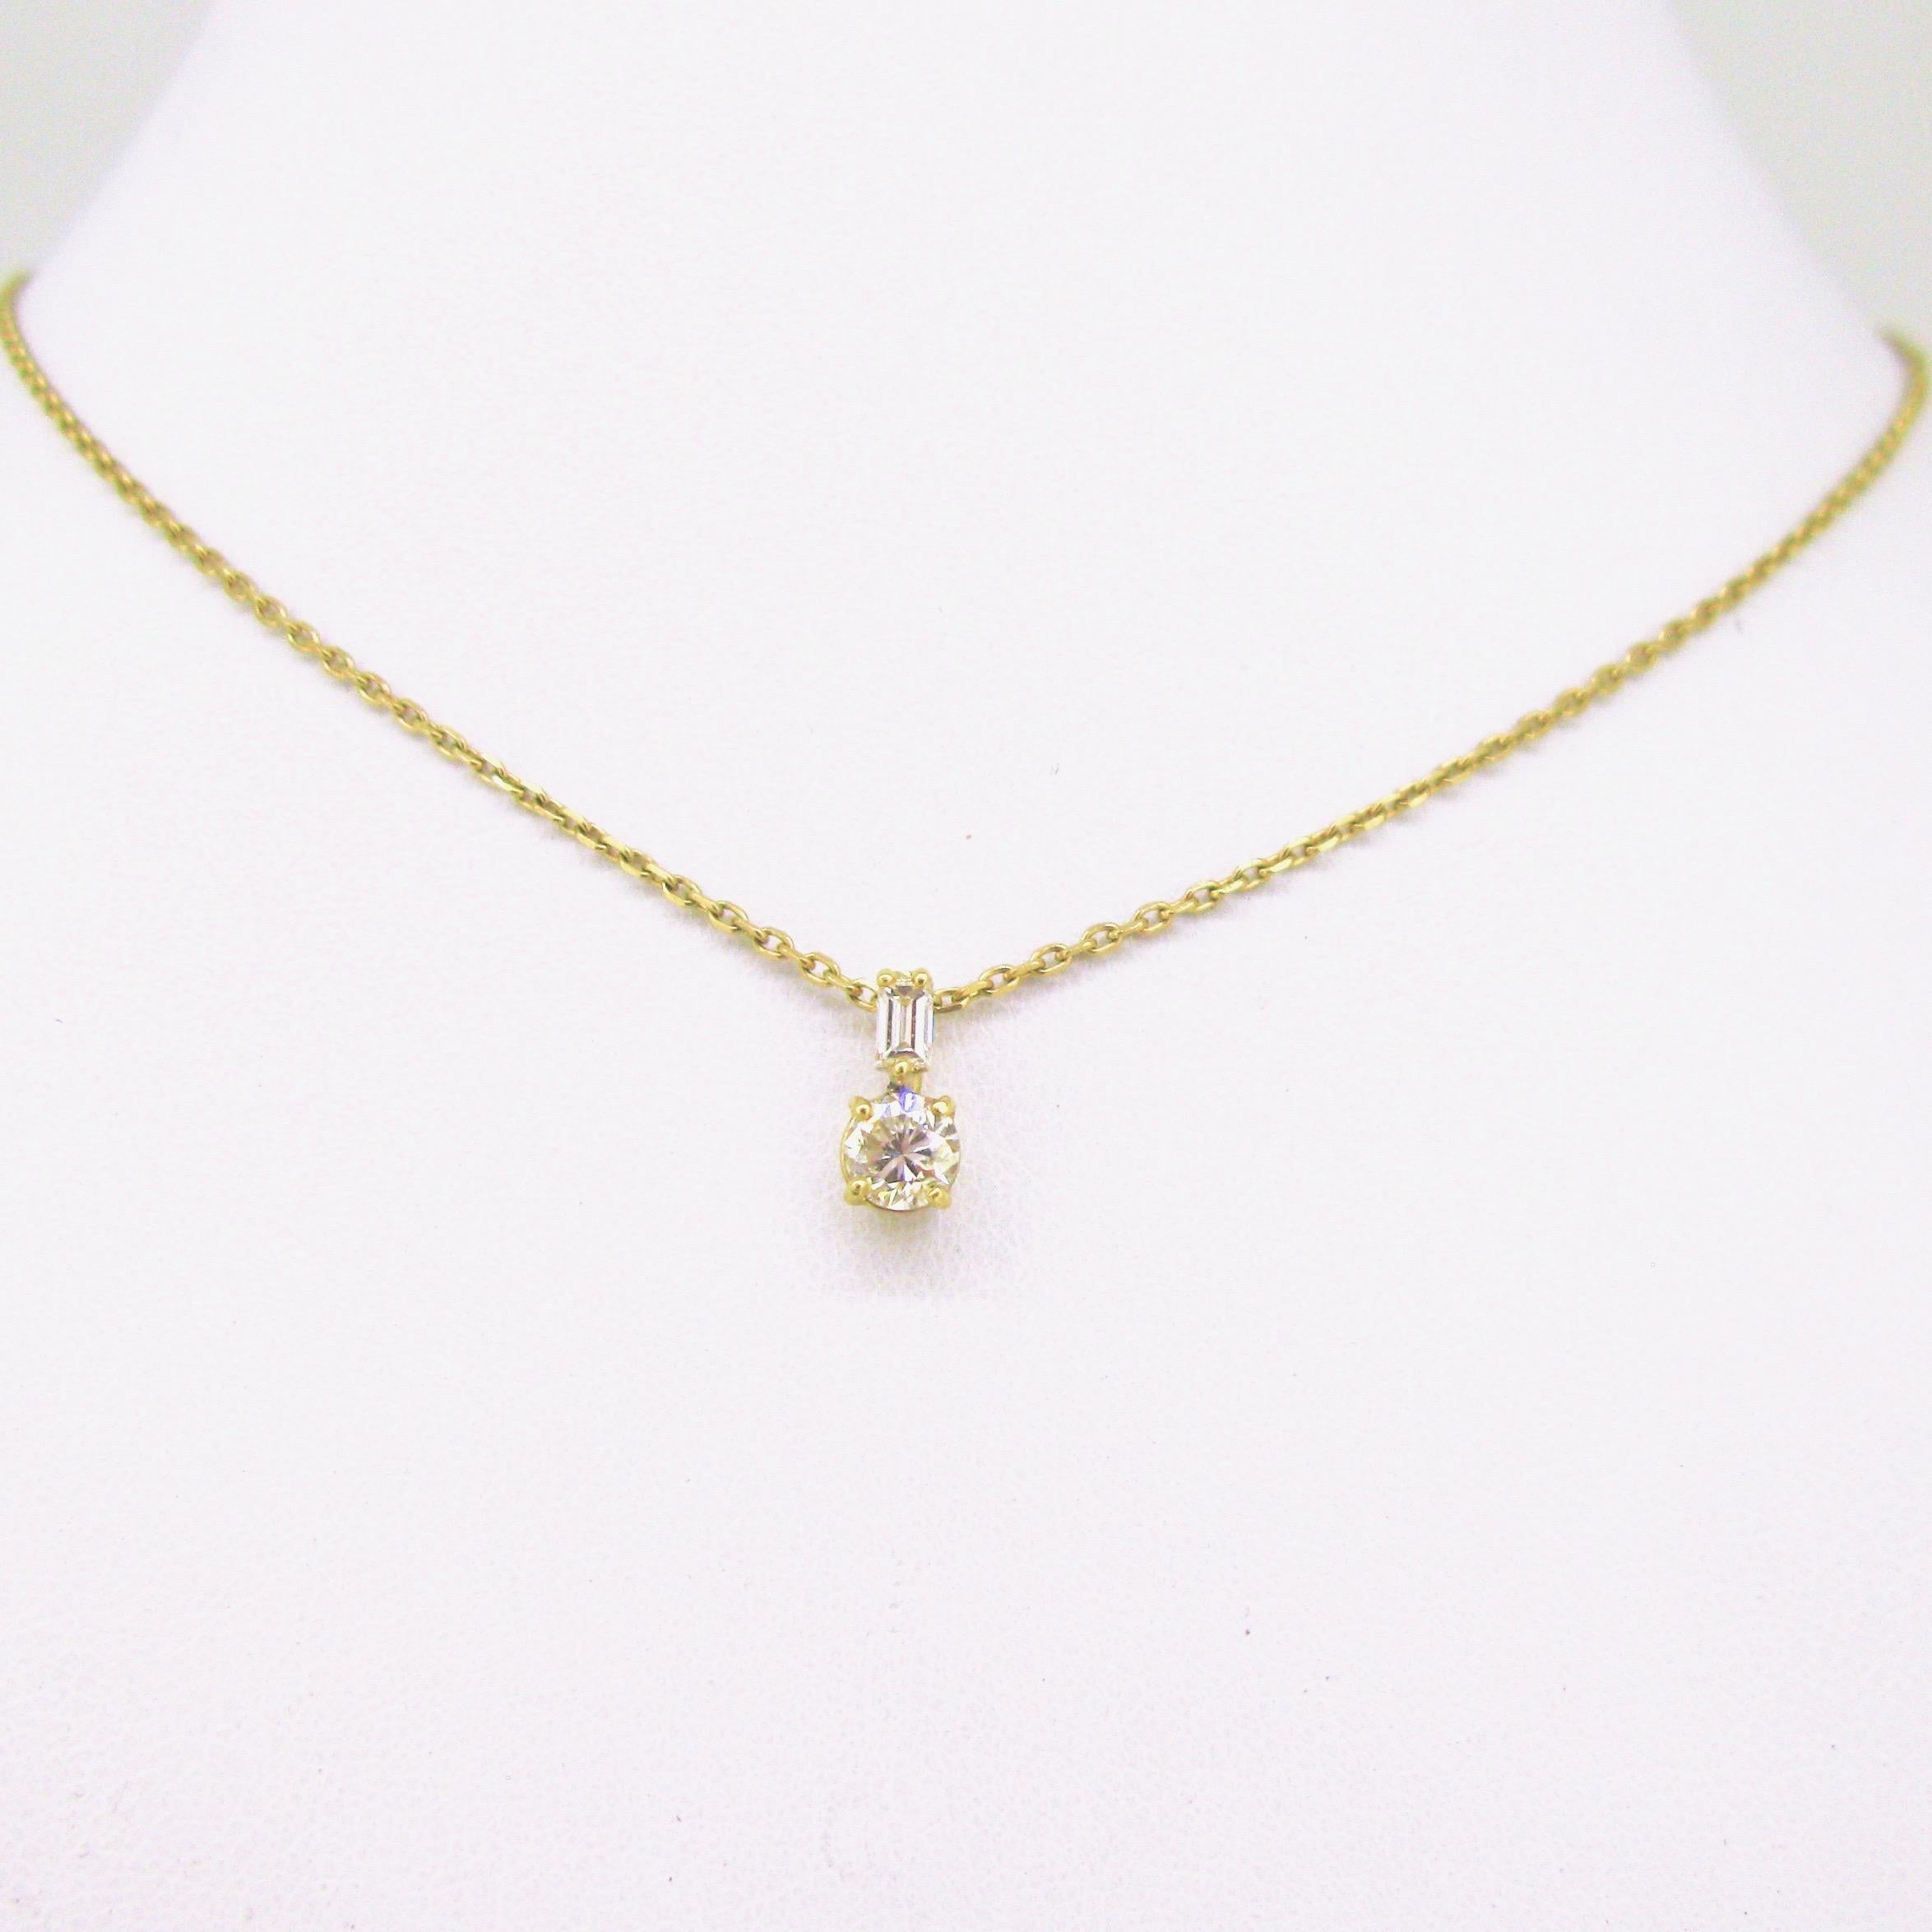 This timeless pendant on chain was made in 18kt yellow gold. The pendant is set with a round diamond of 0.35ct approximately, topped with a baguette diamond of 0.15ct approximately.. The chain is made in 18kt gold and the length is adjustable. This